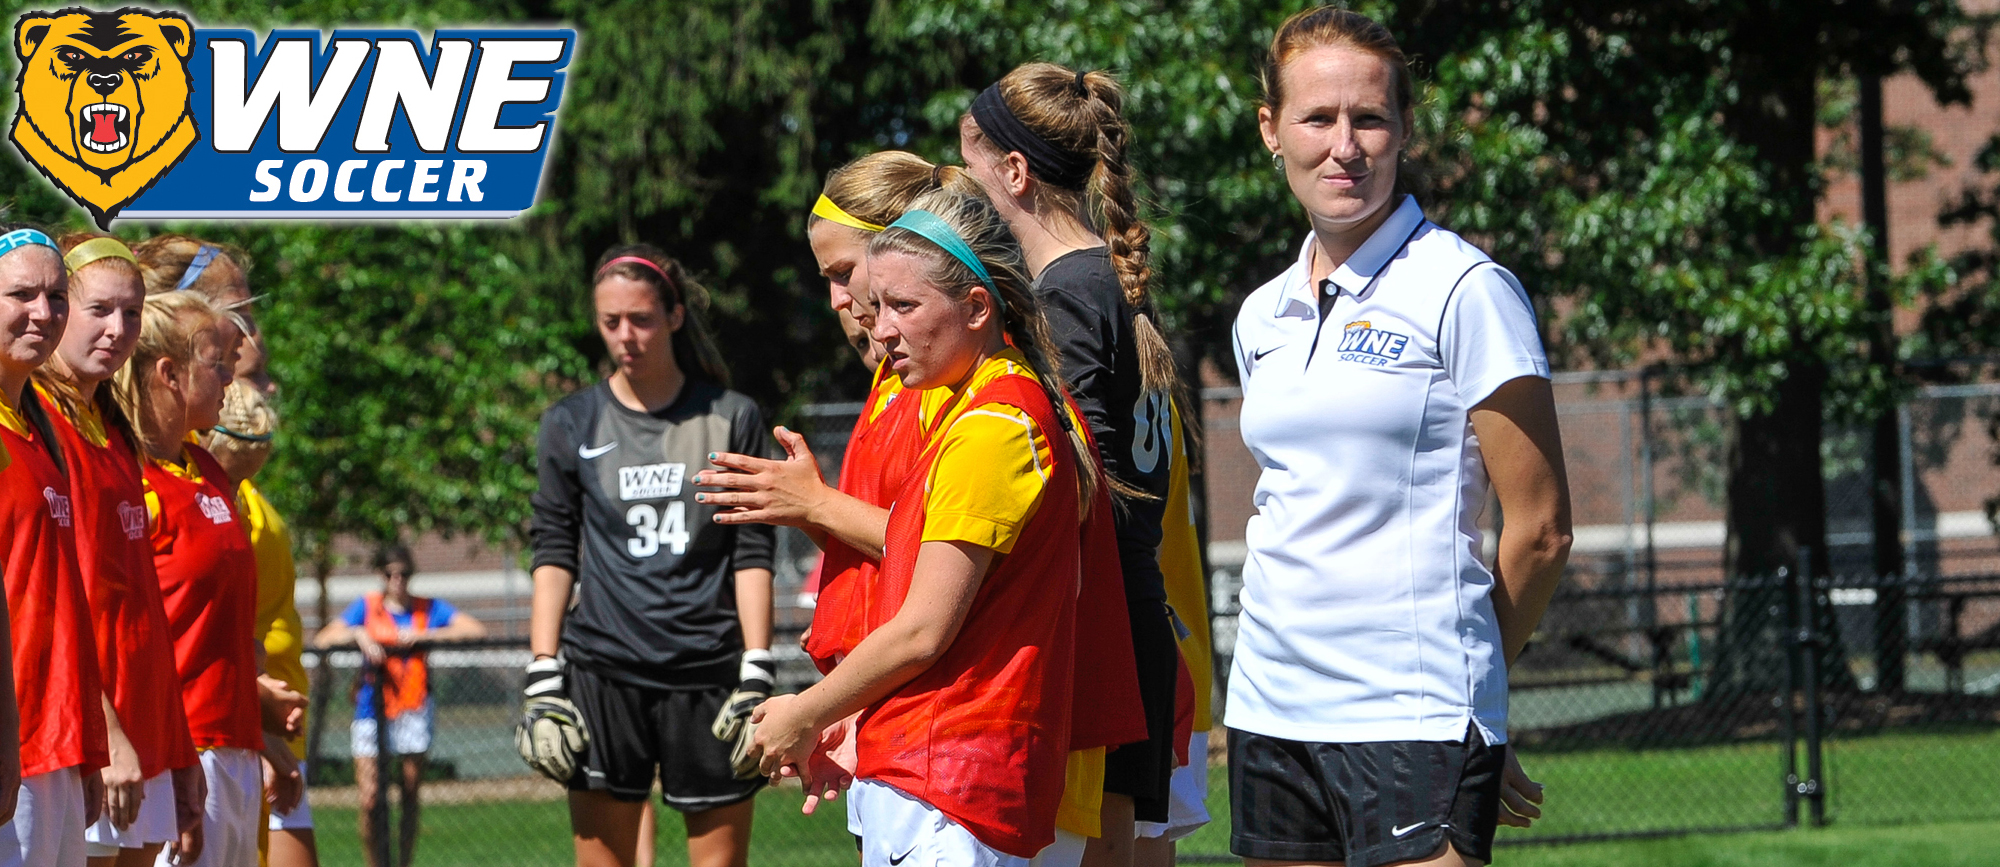 Kristin Hensinger ’07 Promoted to Head Women’s Soccer Coach at Western New England